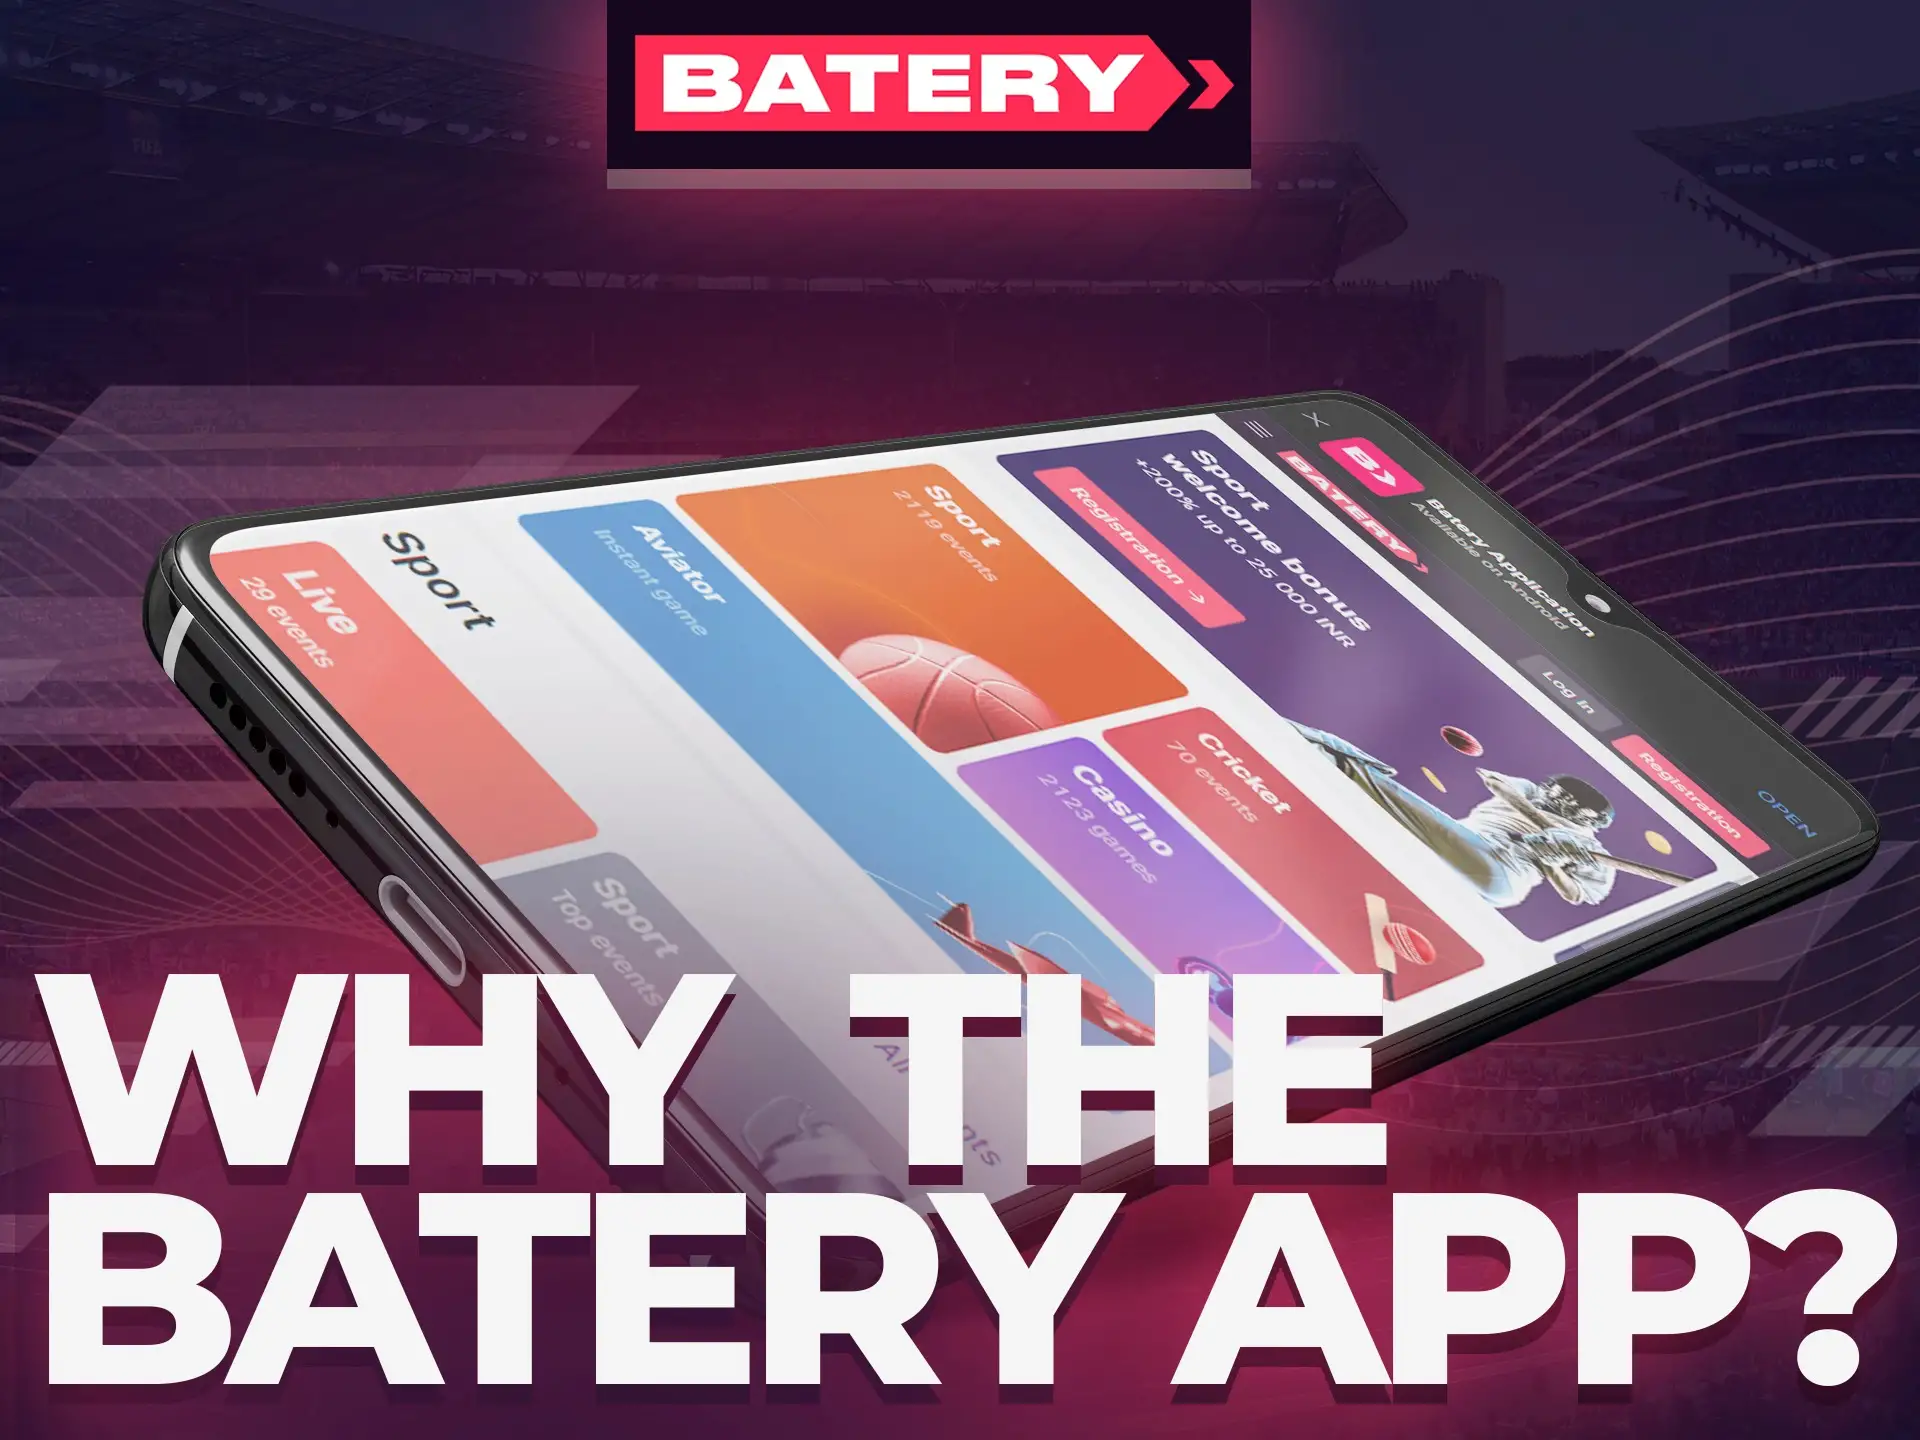 Batery app provides additional features.